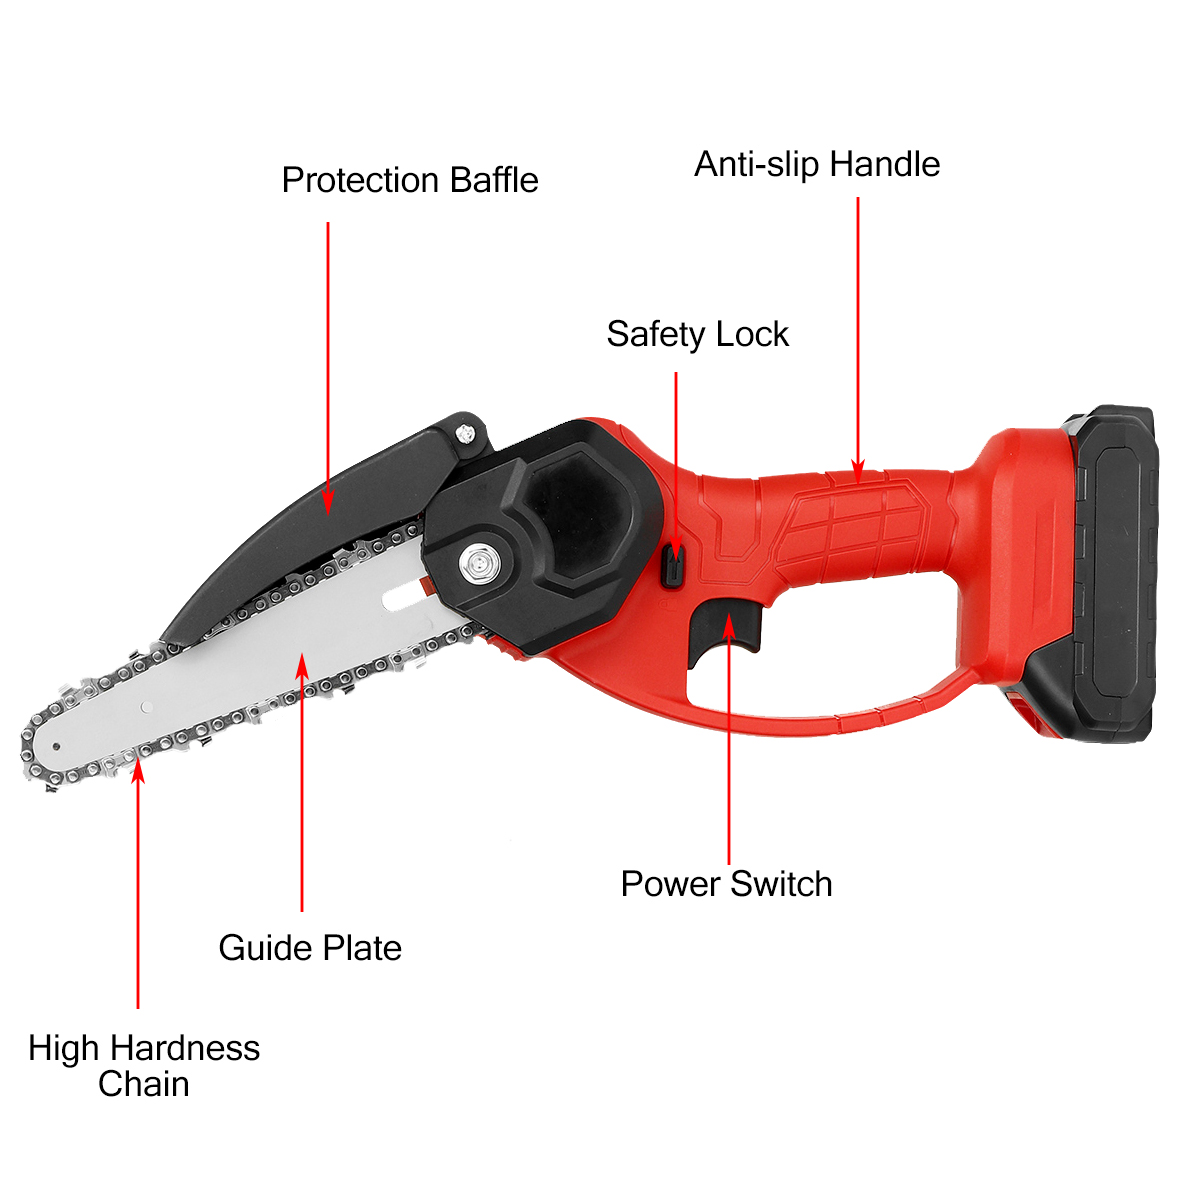 Handheld-Mini-Rechargable-Chainsaw-6-Electric-Chain-Saws-Stepless-Speed-Change-Wood-Work-Cutter-W-Ba-1837413-7